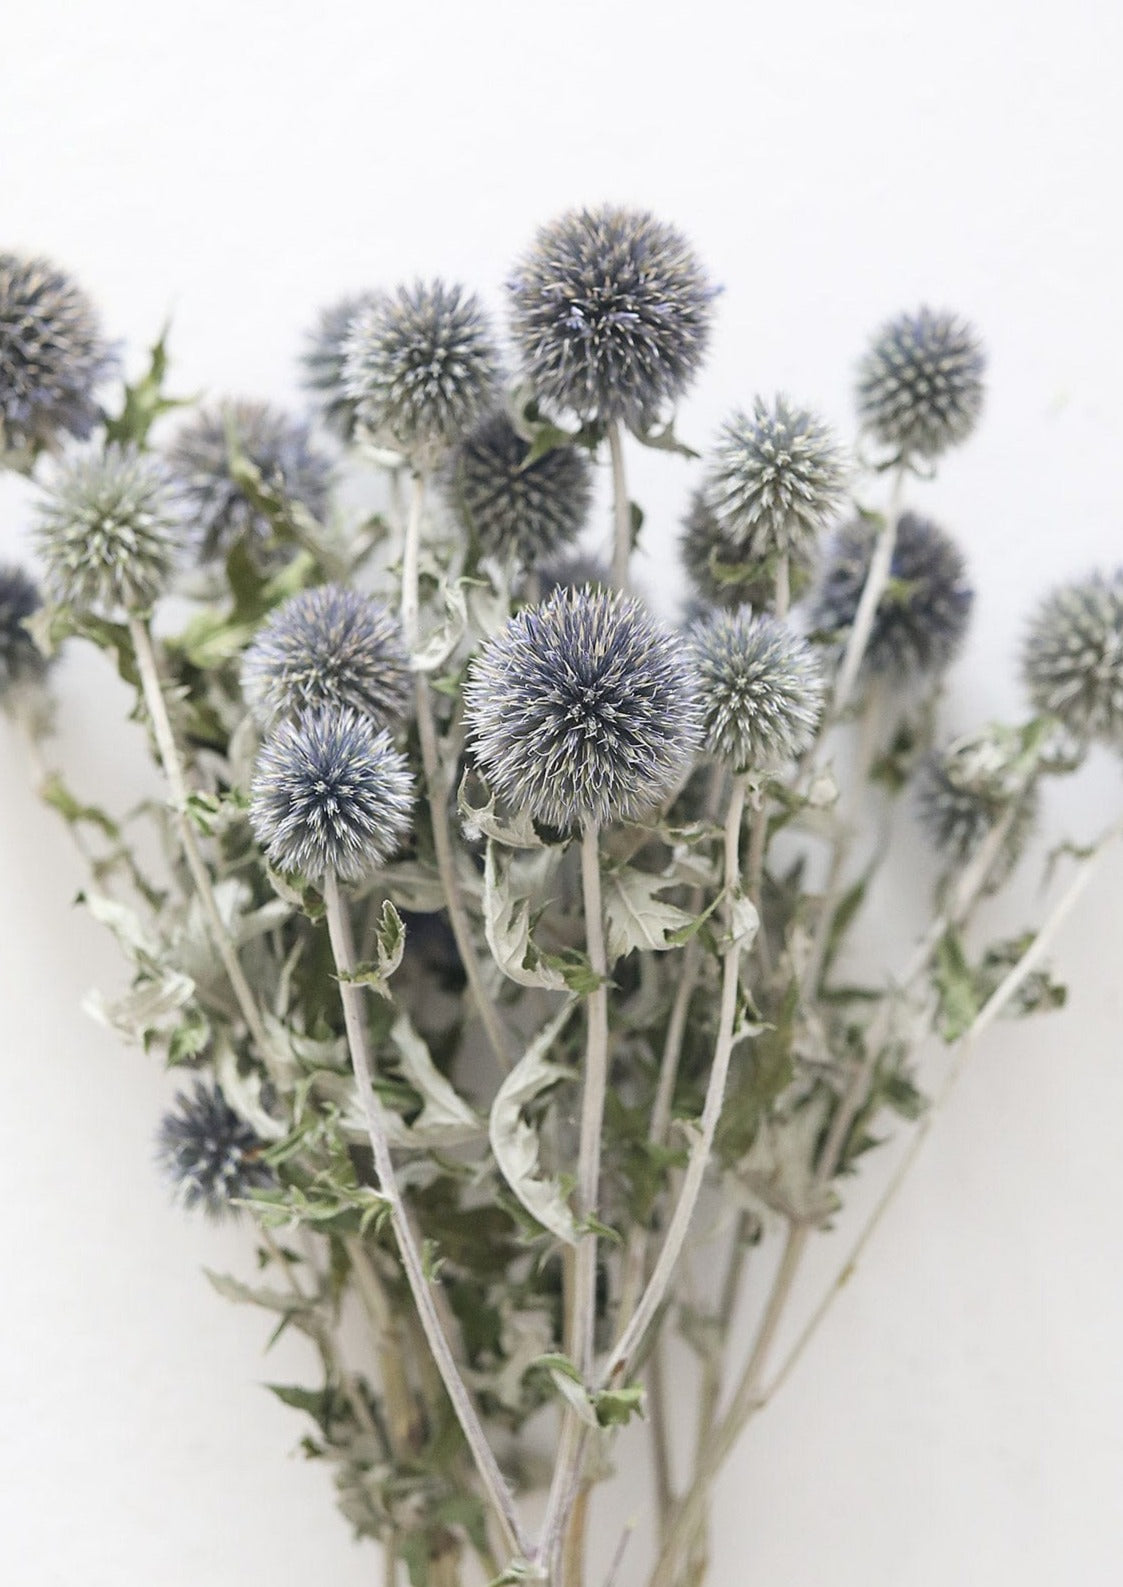 Dried Flower Globe Thistle Echinops at Afloral